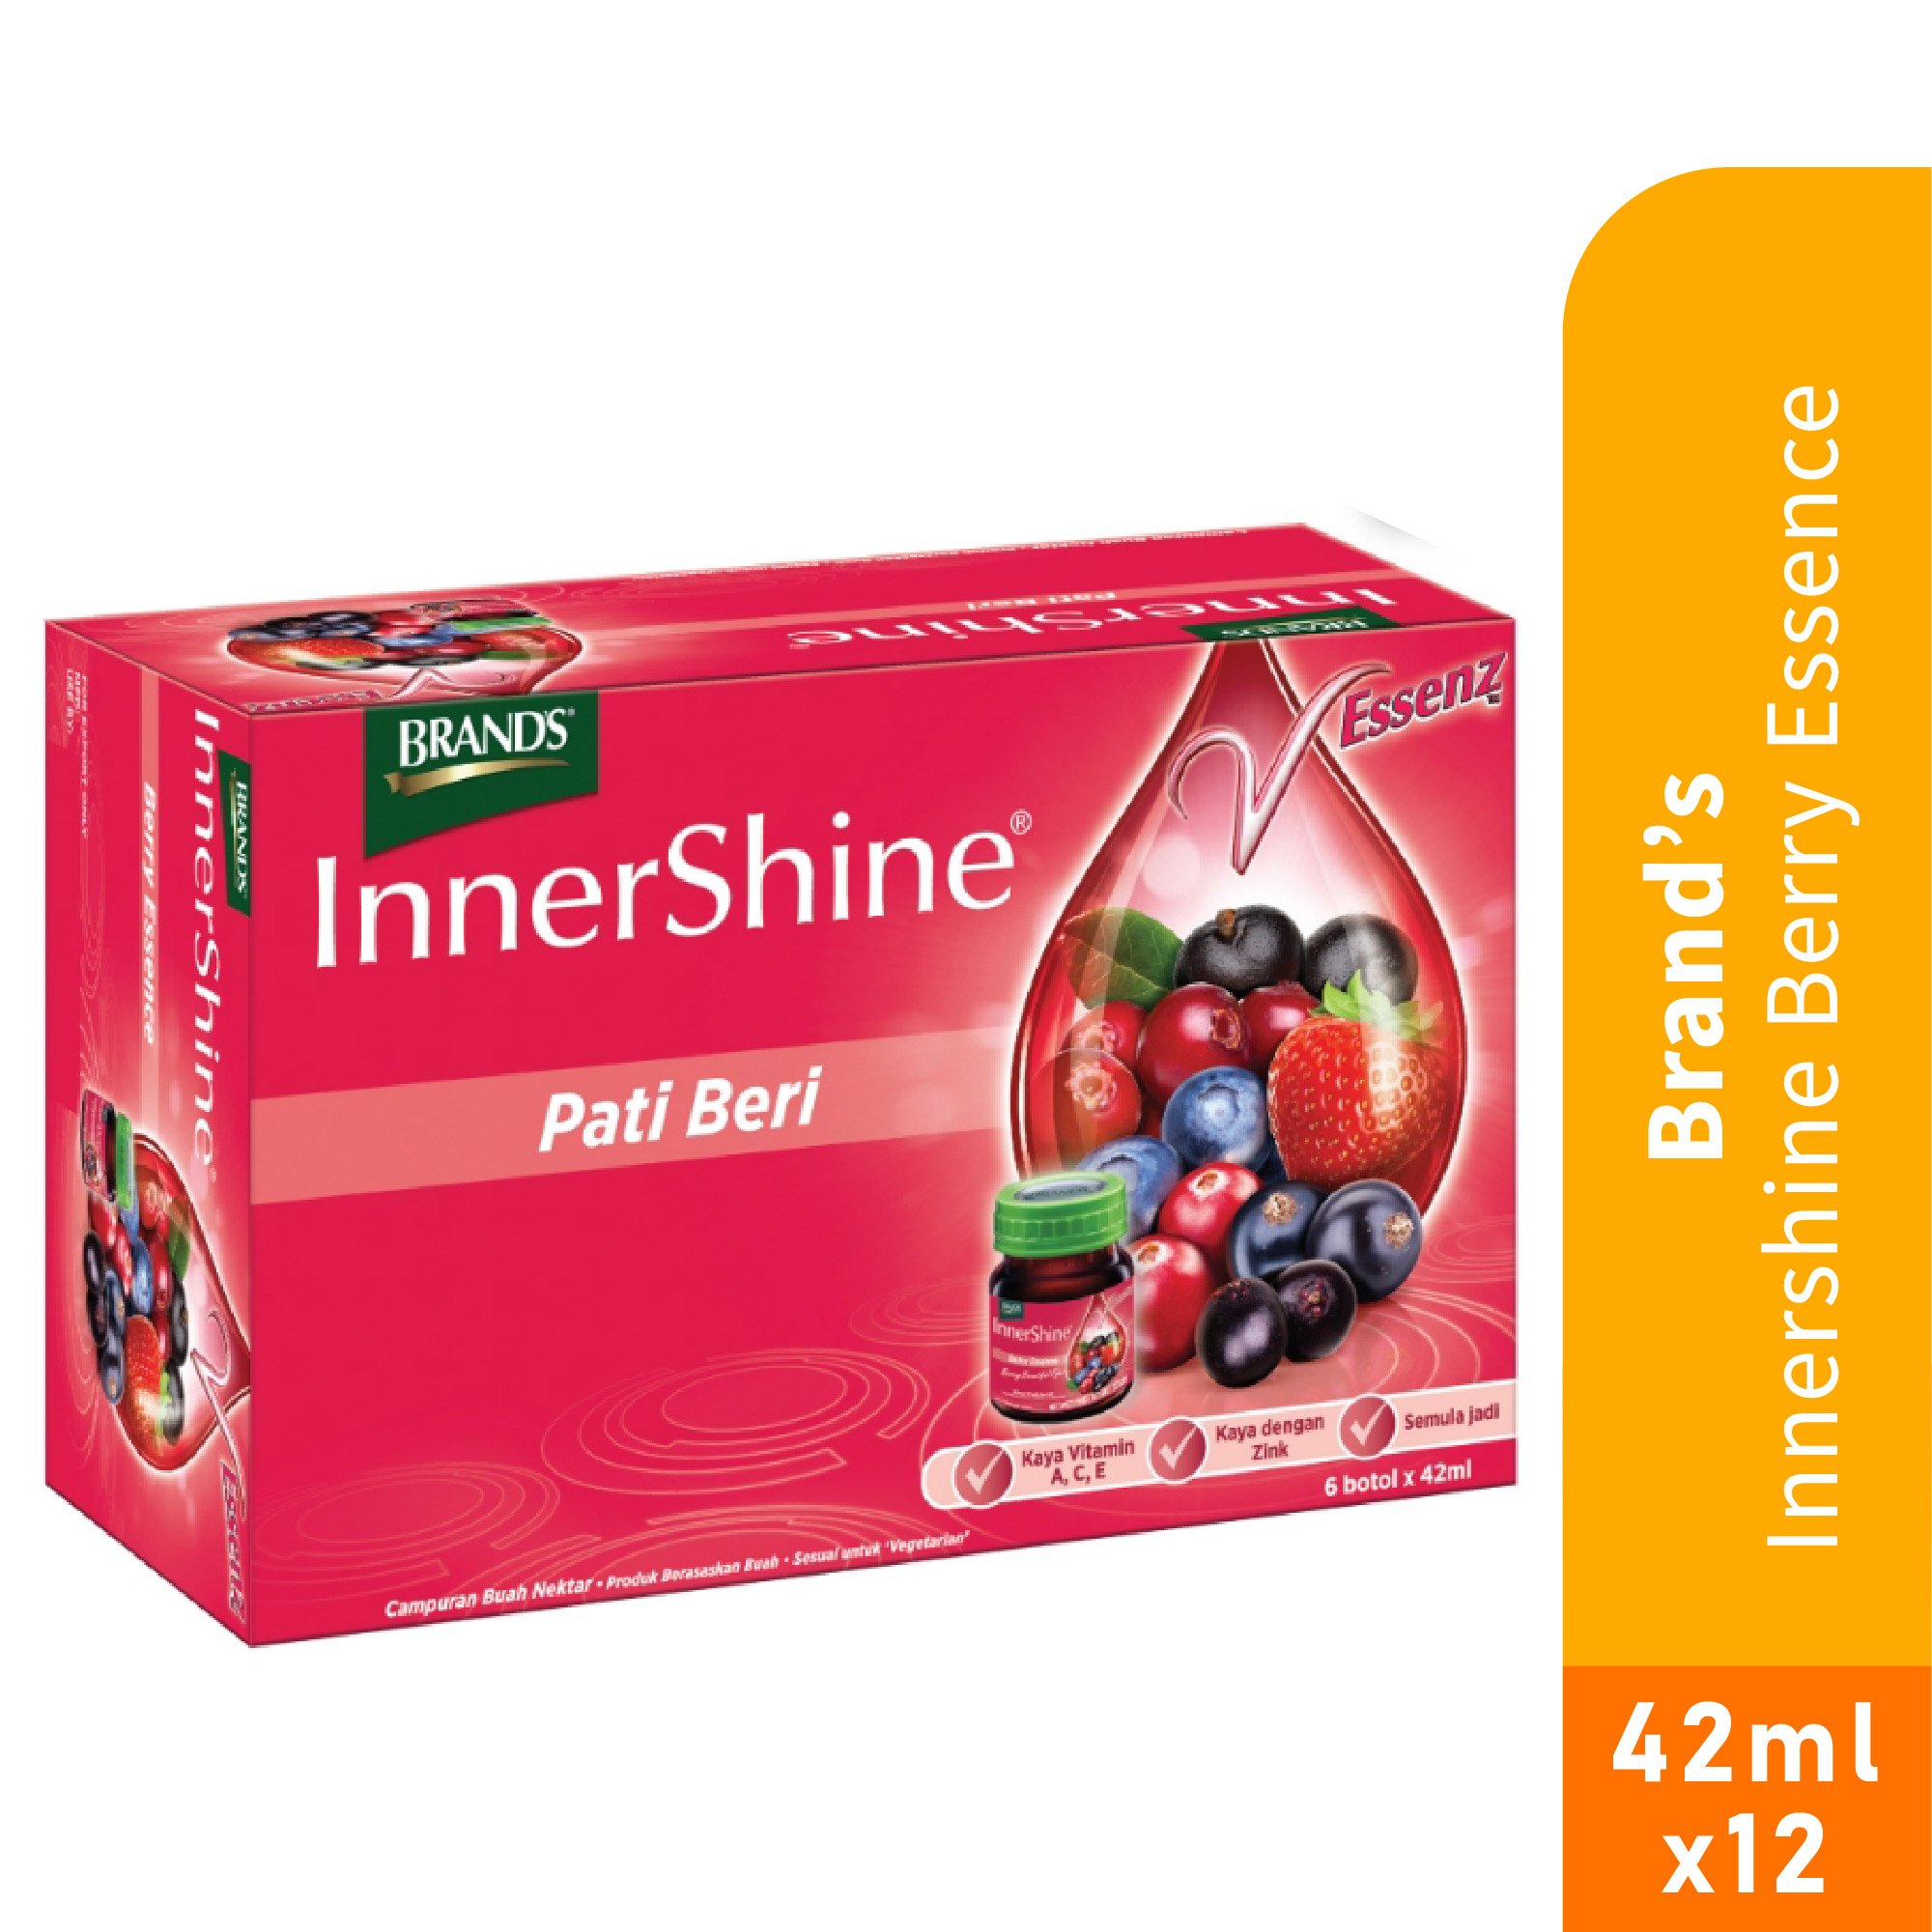 BRANDS Innershine Berry Essence 42ml X 12's with Mixed Berries, Pati Berry, Berry Extract for Young Looking Skin